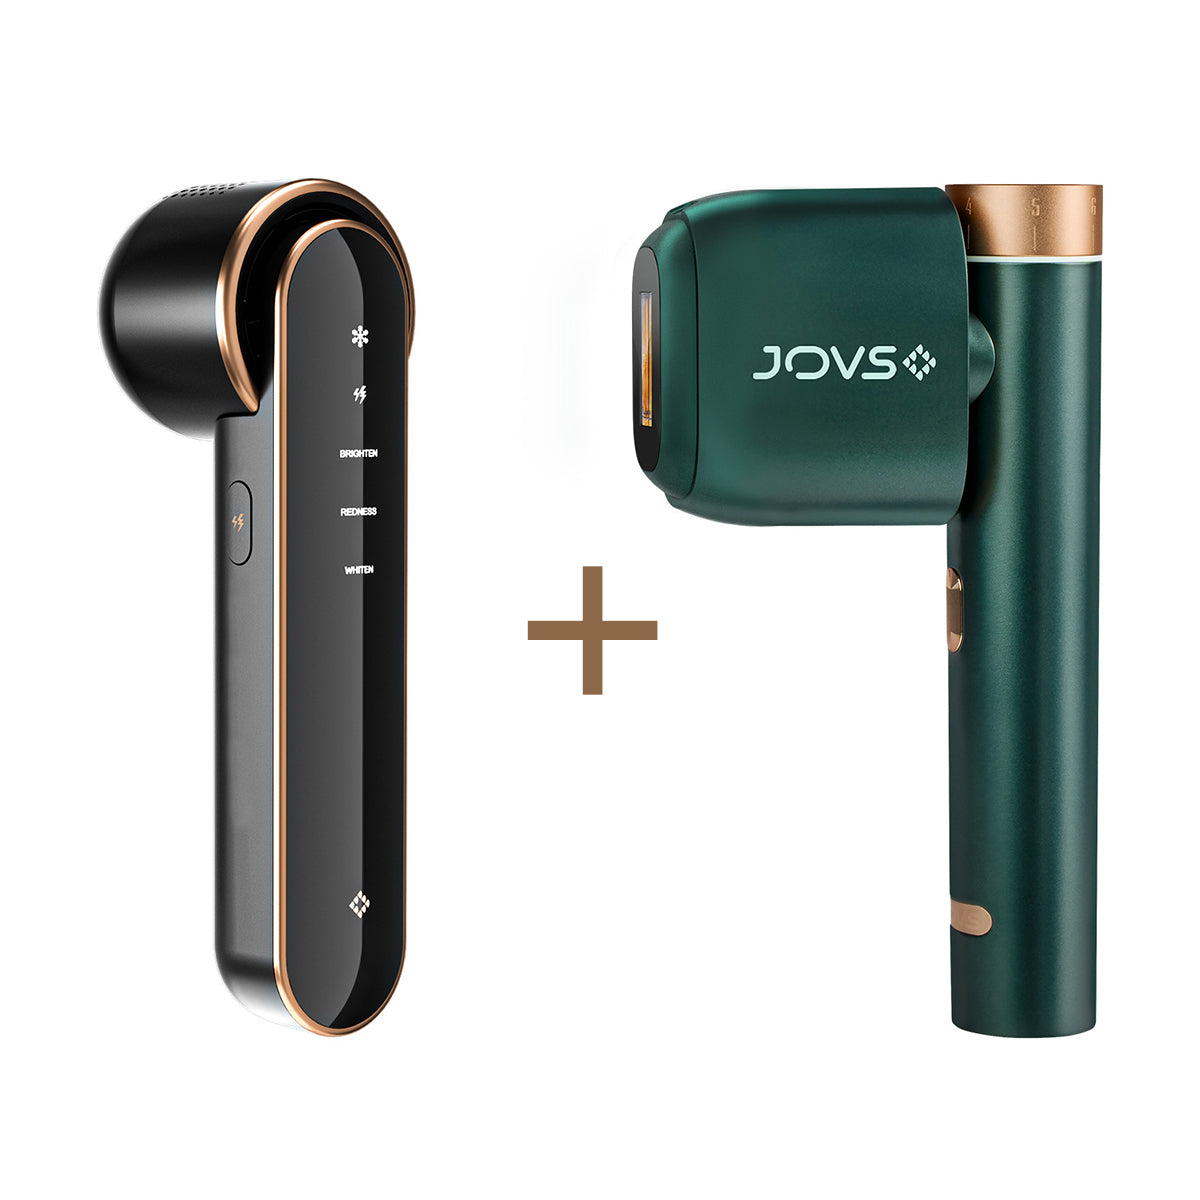 JOVS Blacken DPL Photorejuvenation Skincare Device paired with JOVS Mini Wireless IPL Hair Removal Device for comprehensive skin and hair treatment.